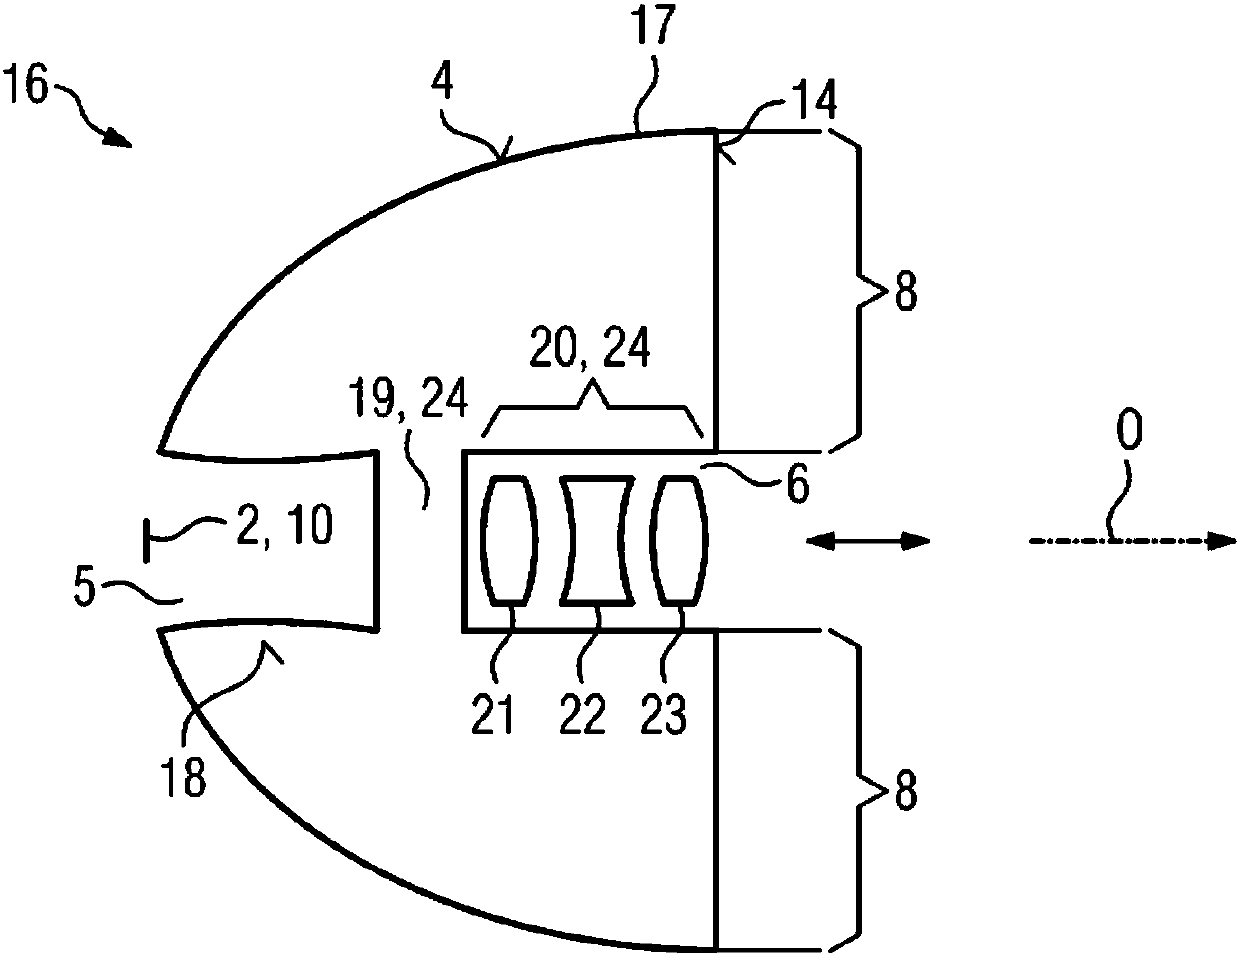 Optical element and lighting apparatus